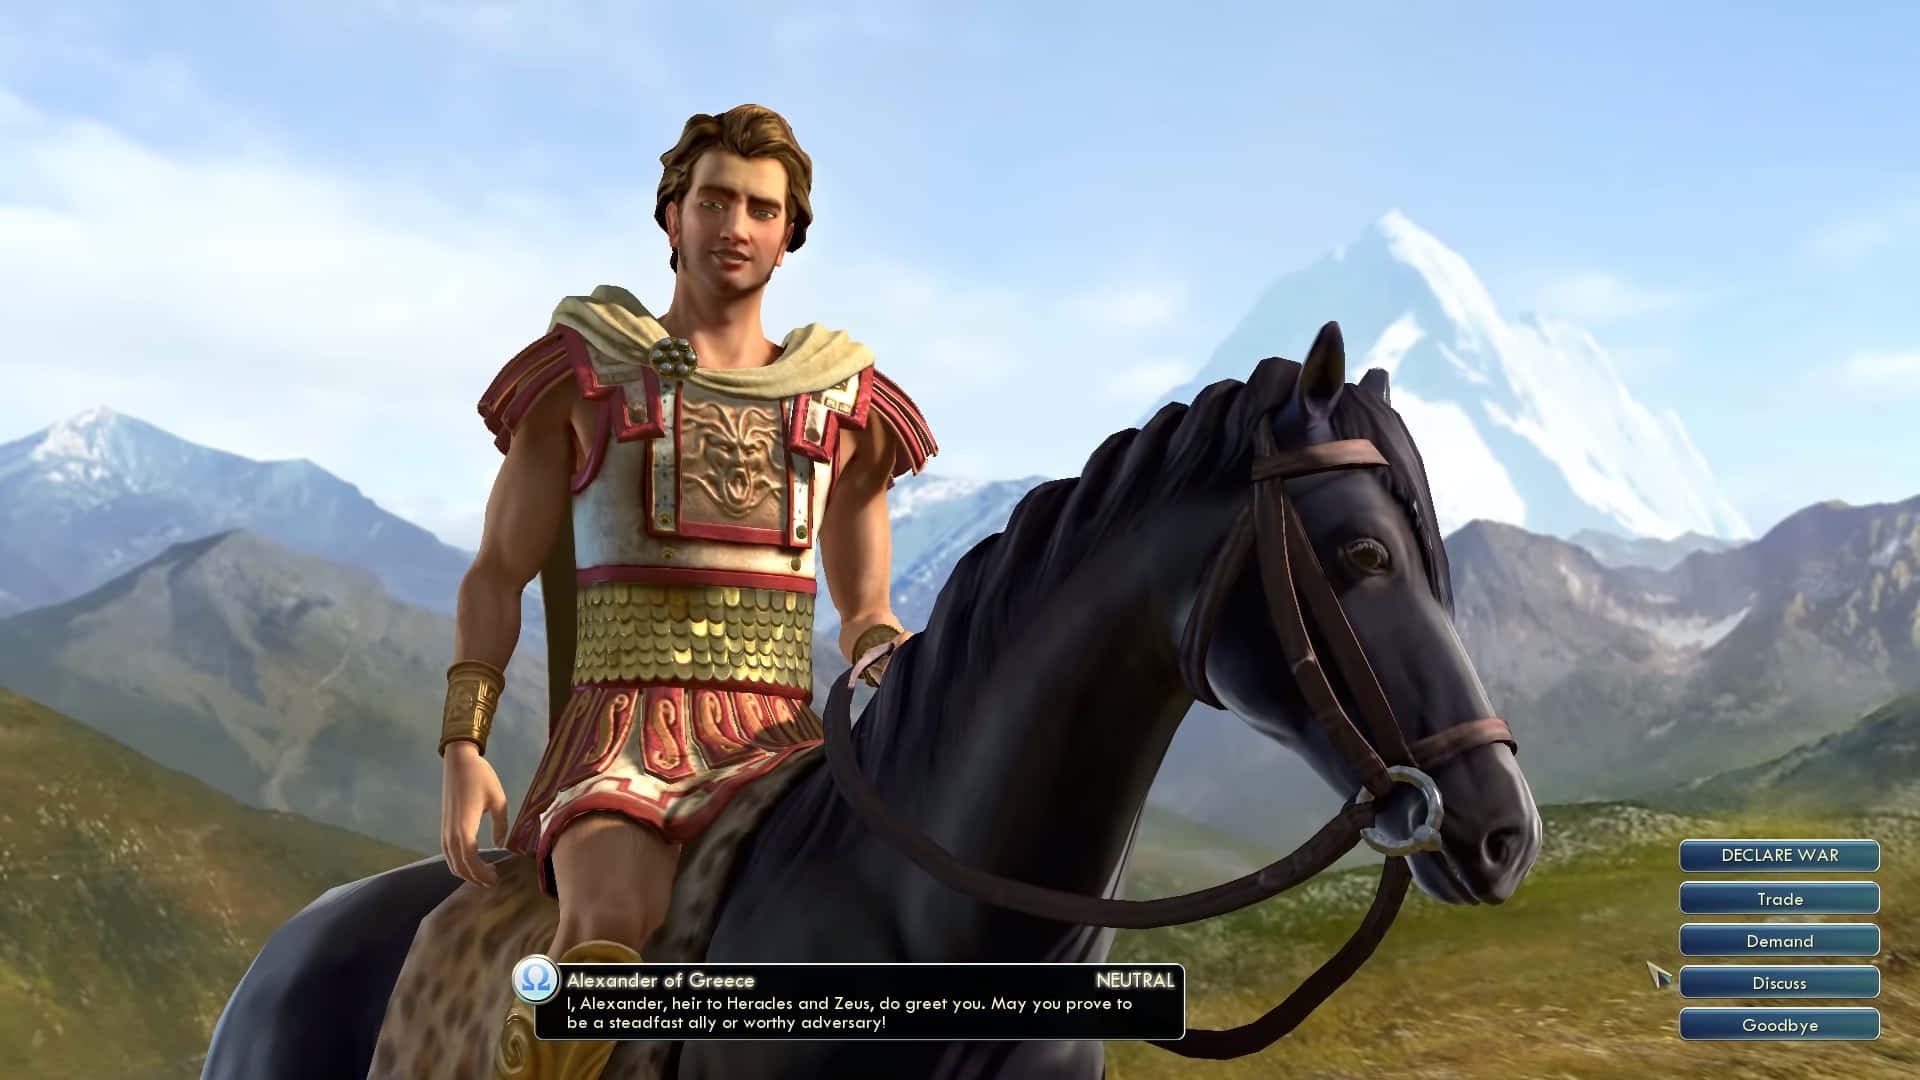 A Man Is Riding A Horse In A Video Game